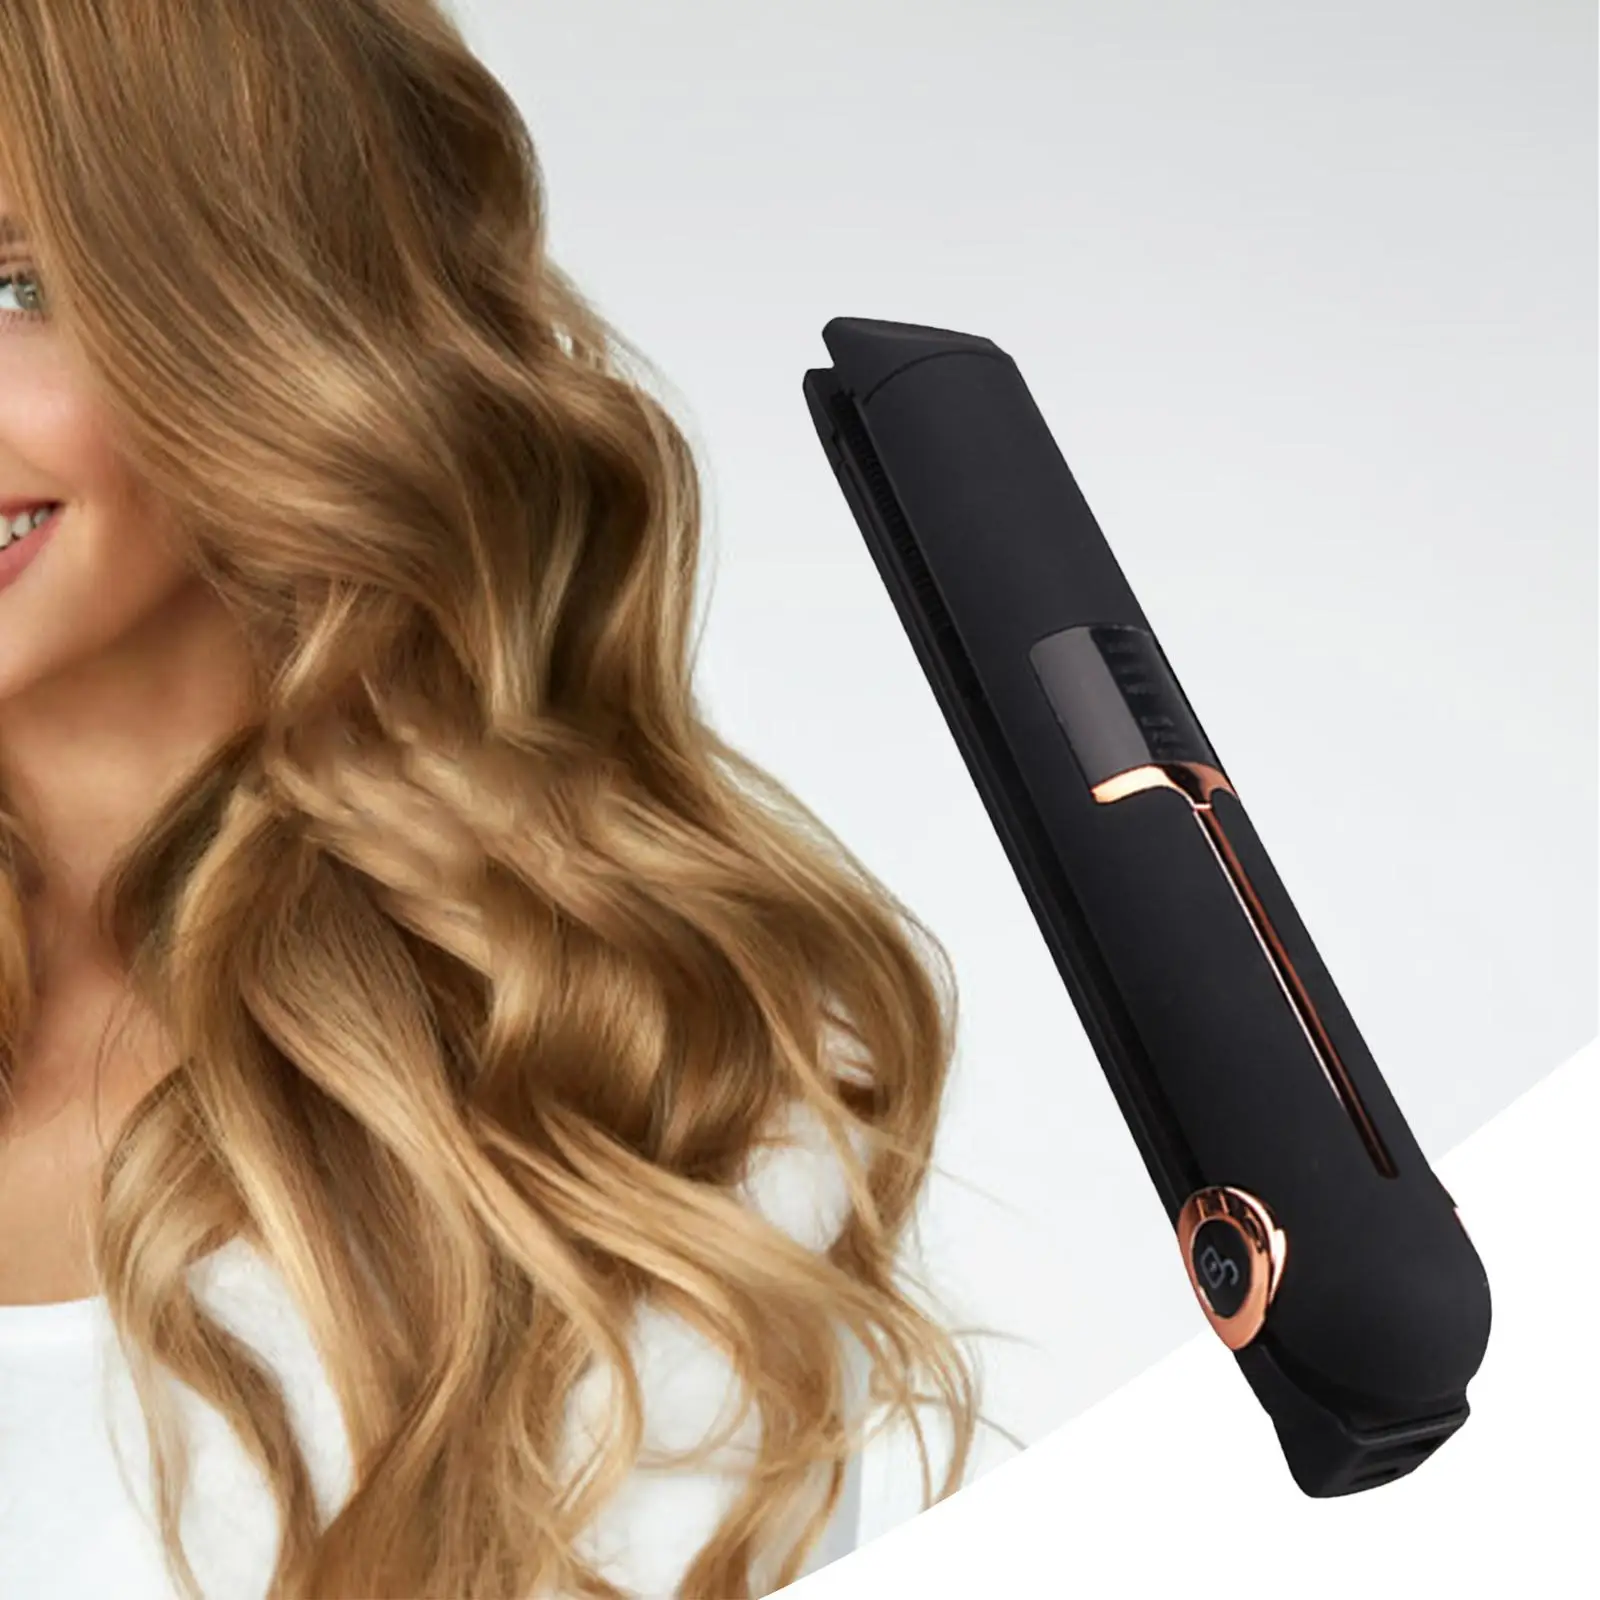 Cordless Hair Curler Straightener 3-Level Temp USB Charging Full Automatic Power Bank Styling Tools for Salon Hair Straightening